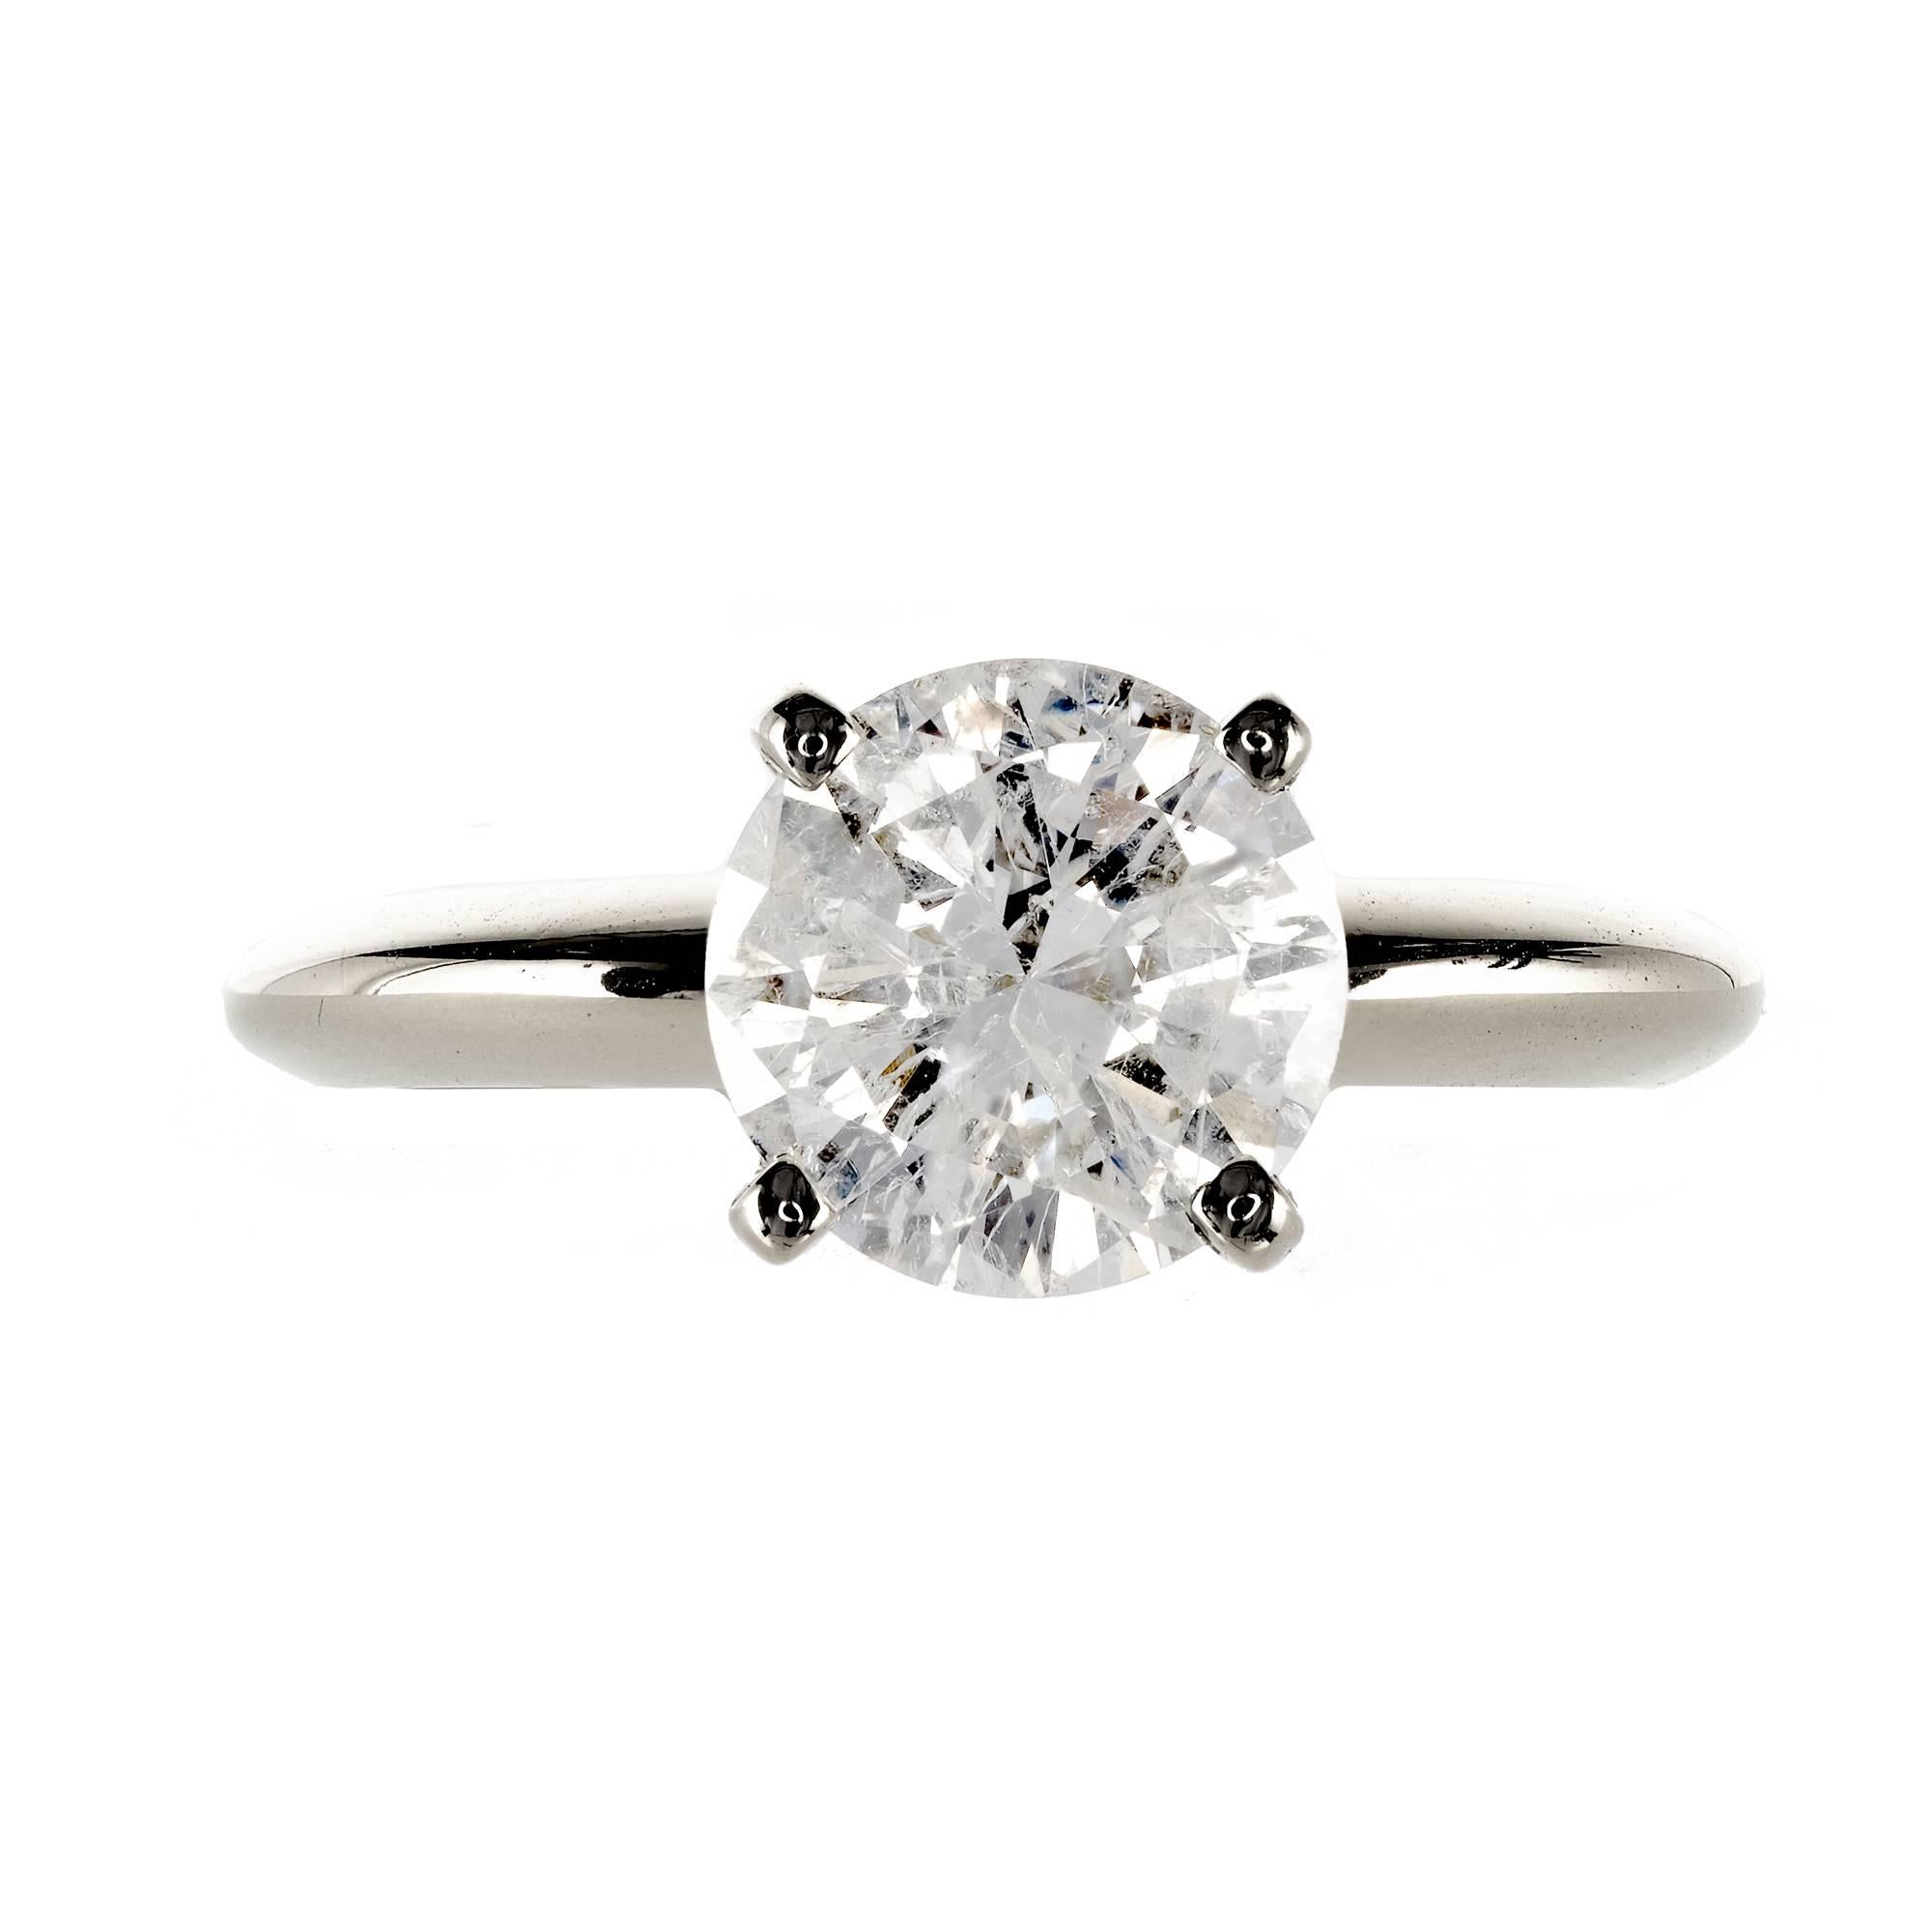 Transitional Ideal cut diamond solitaire engagement ring in a 14k white gold four prong setting.  EGL certified G color, I1 clarity. 

1 round diamond, approx. total weight 1.77cts, G, I1, EGL certificate # US57041701D 
Size 6.25 and sizable 
14k